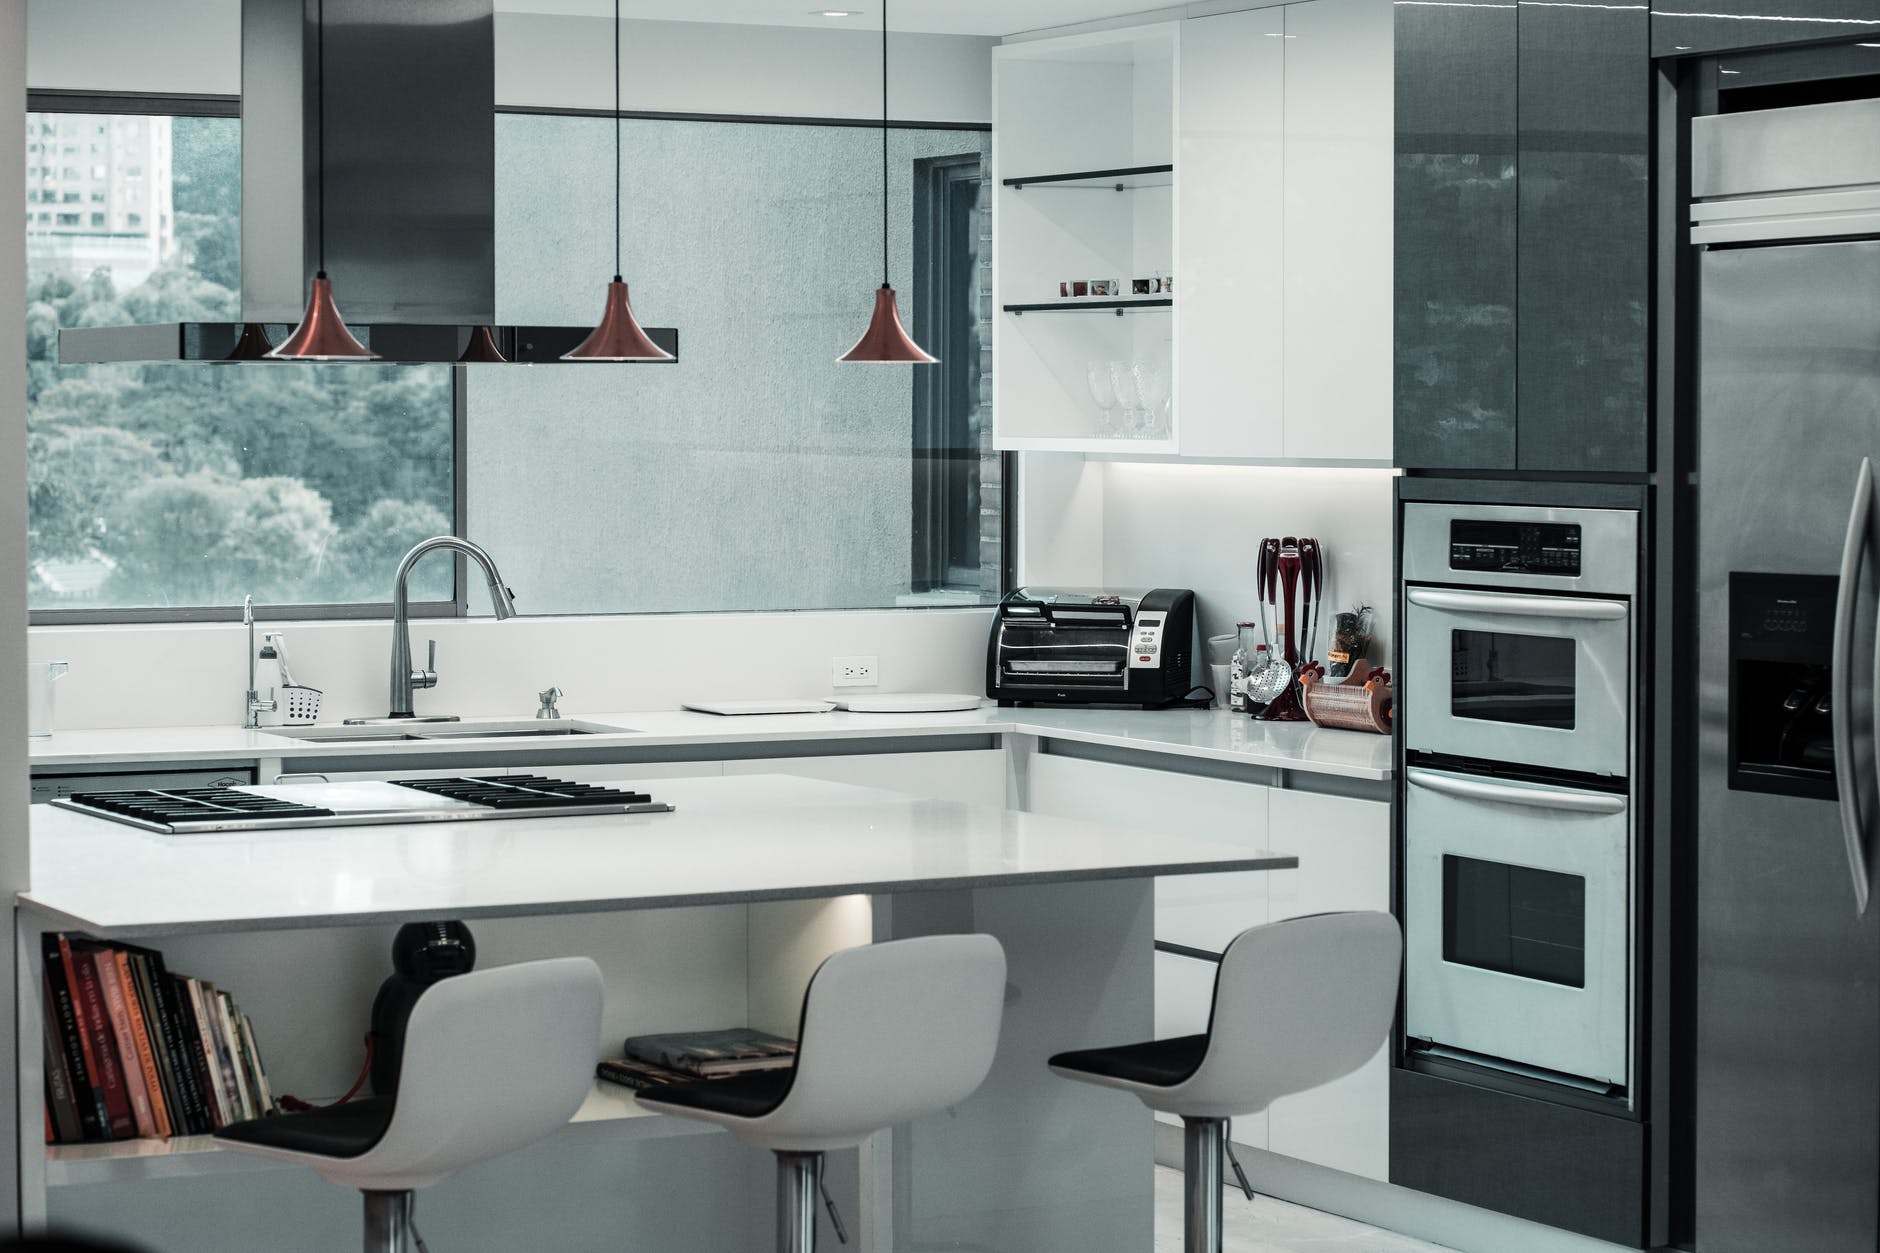 Stirling Kitchens - Family owned kitchen manufacturer in East Tamaki, Auckland